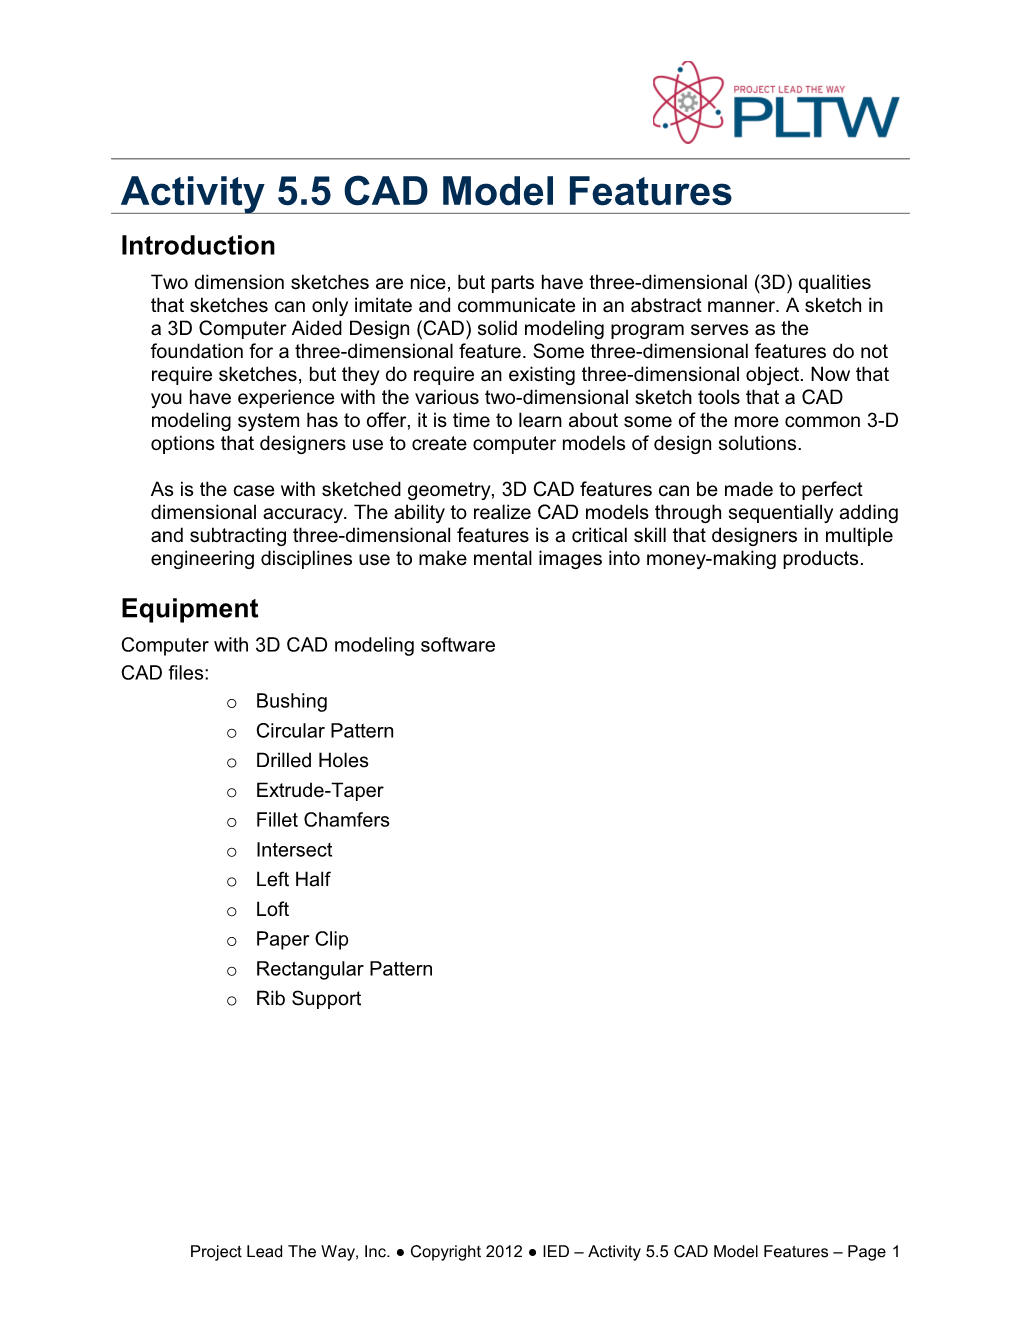 Activity 5.5 CAD Model Features